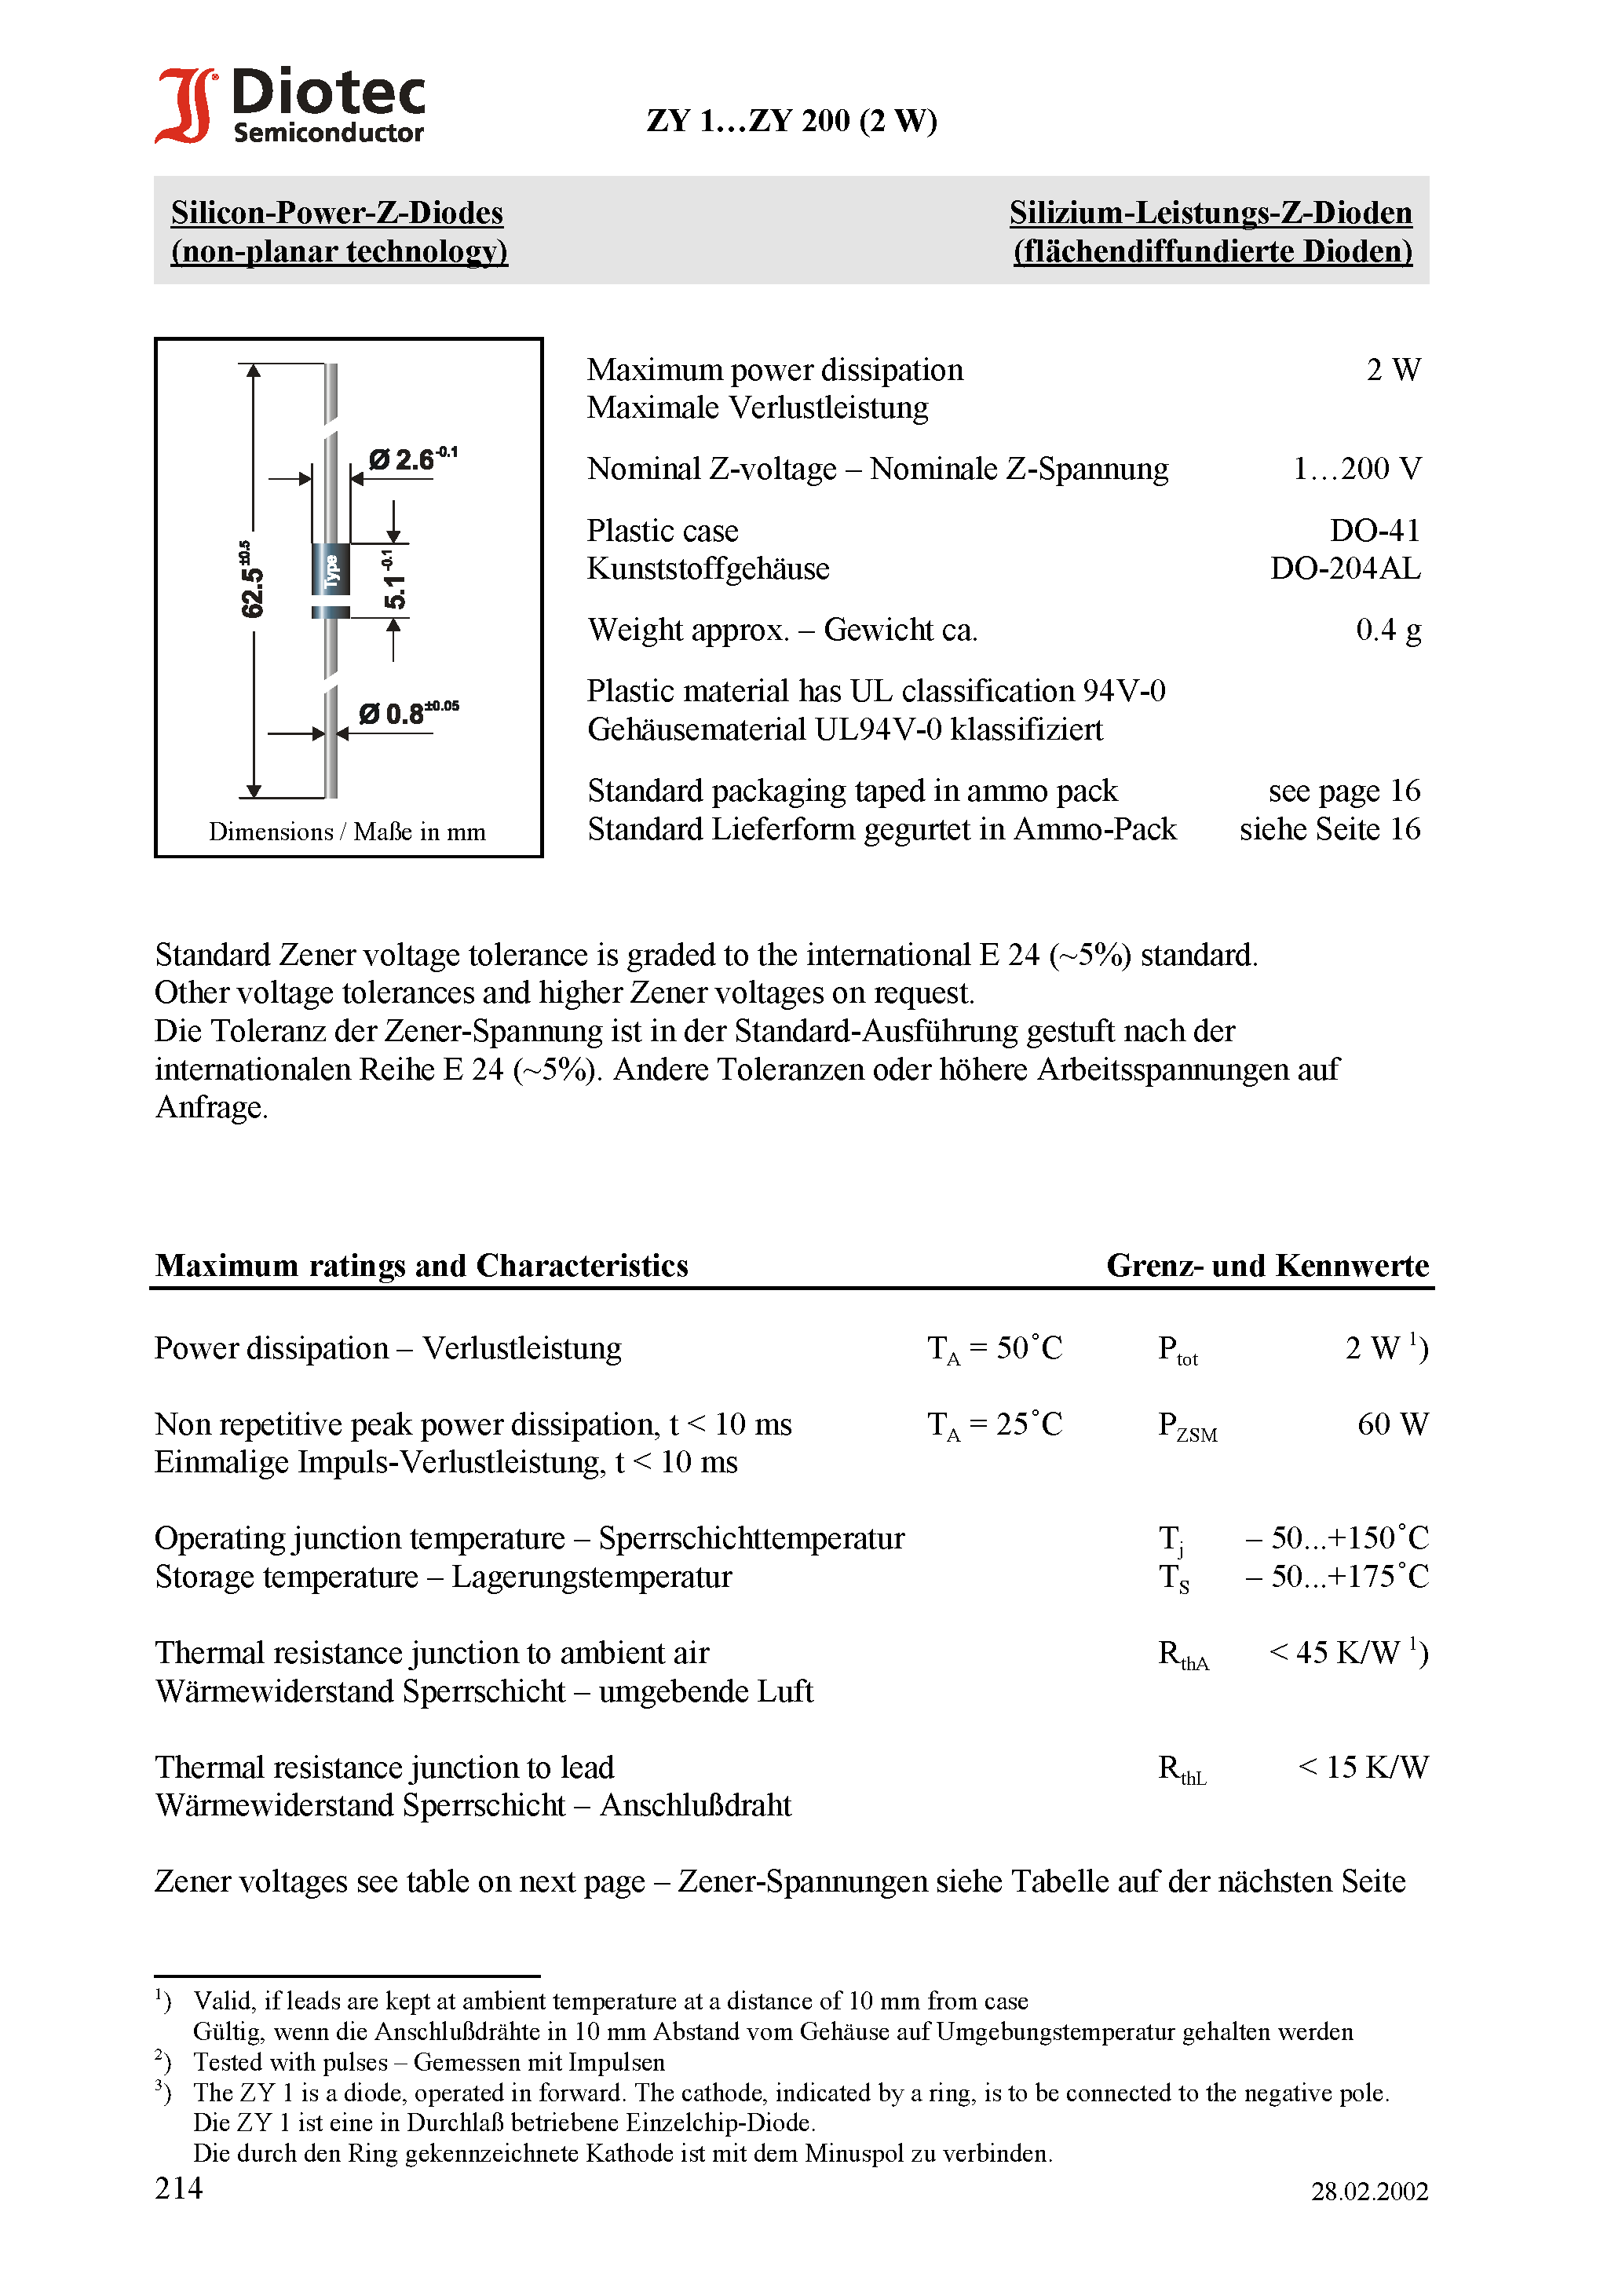 Datasheet ZY6.8 - Silicon-Power-Z-Diodes (non-planar technology) page 1